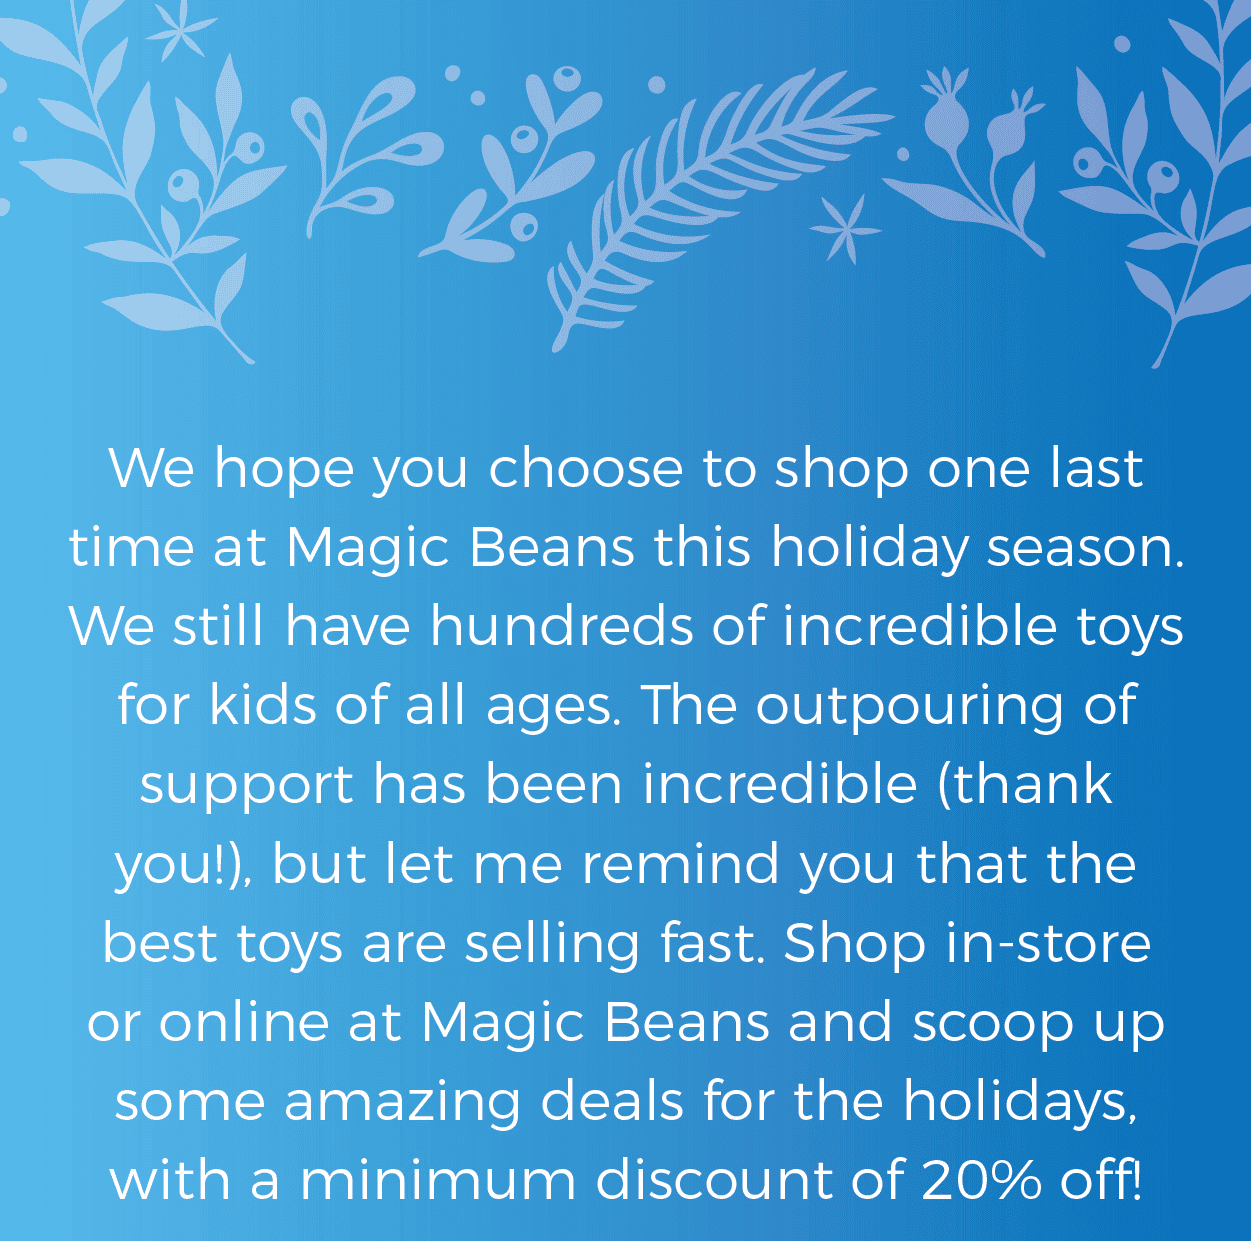 We hope you choose to shop one last time at Magic Beans this holiday season. We still have hundreds of incredible toys for kids of all ages. The outpouring of support has been incredible (thank you!), but let me remind you that the best toys are selling fast. Shop in-store or online at Magic Beans and scoop up some amazing deals for the holidays, with a minimum discount of 20% off!